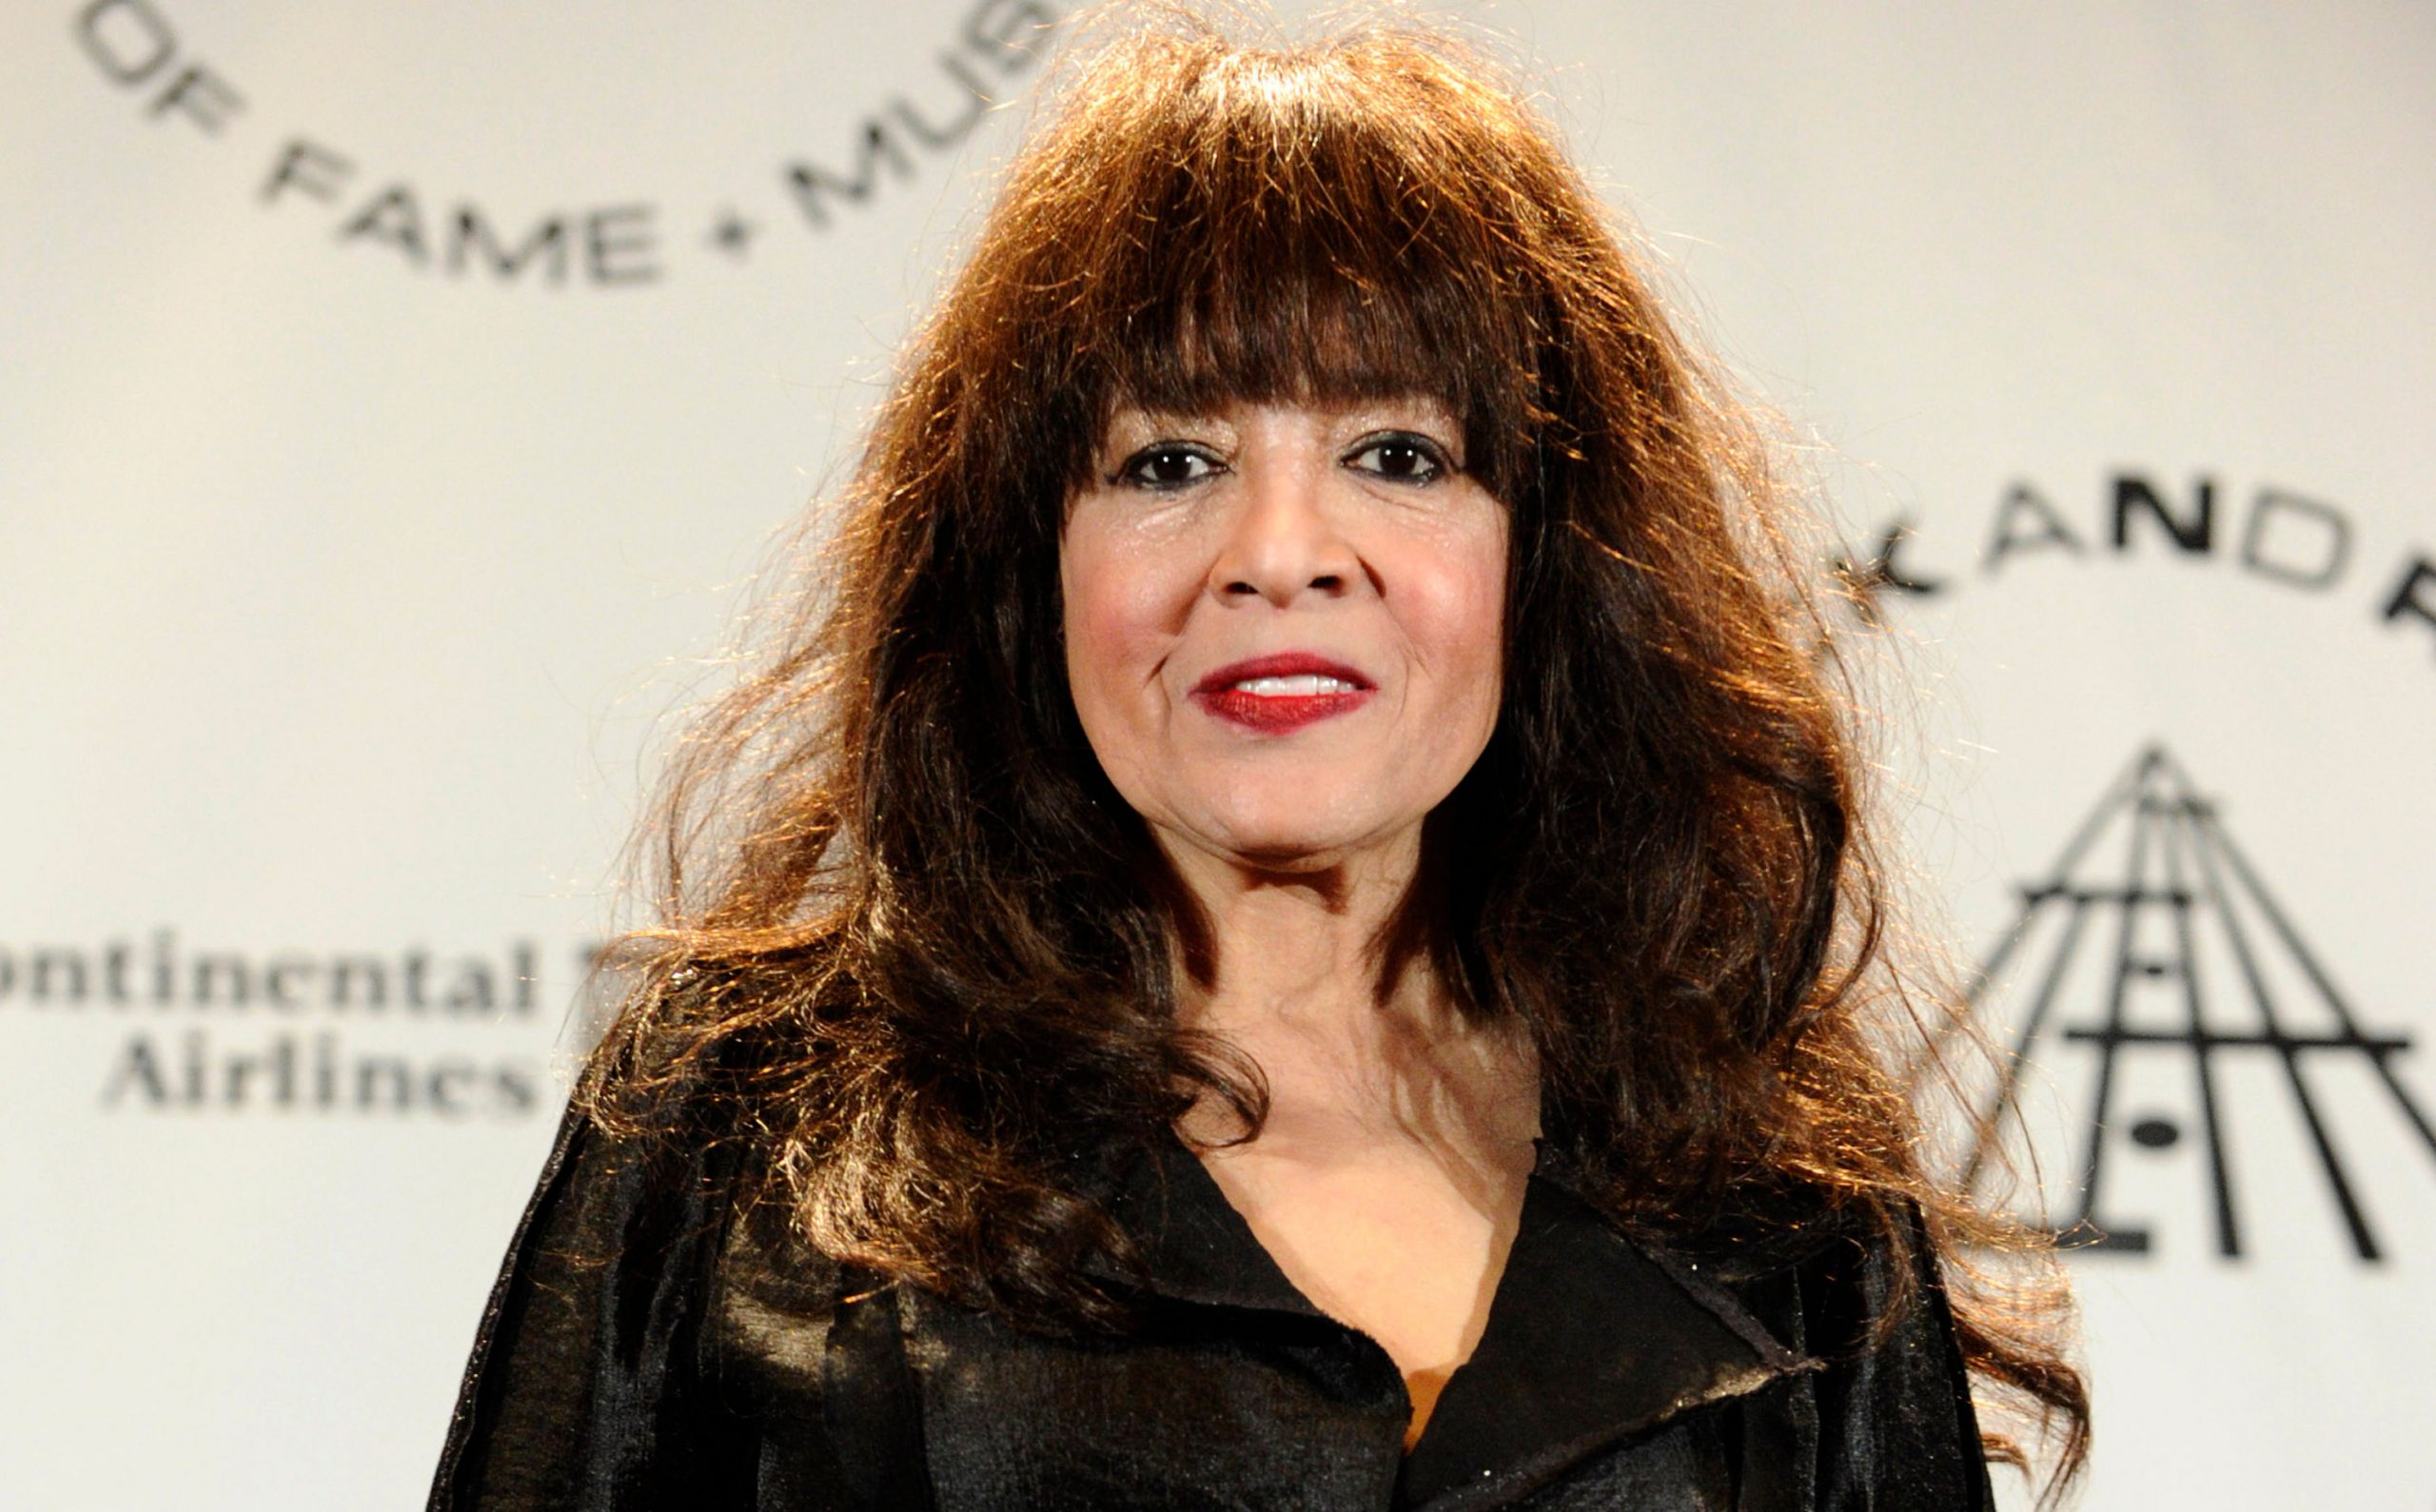 Ronnie Spector, singer of Ronettes hit ‘Be My Baby’, dies at 78